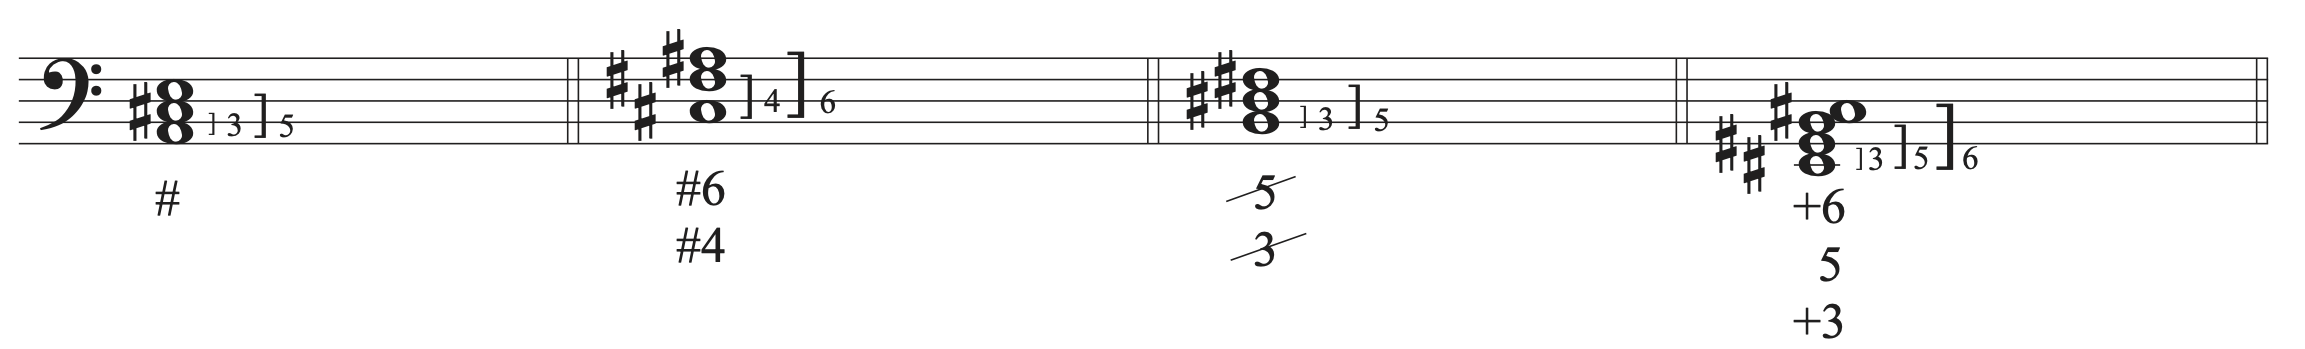 Examples of sharps, slashes, and plus signs used in figure bass to raise notes by a half step.